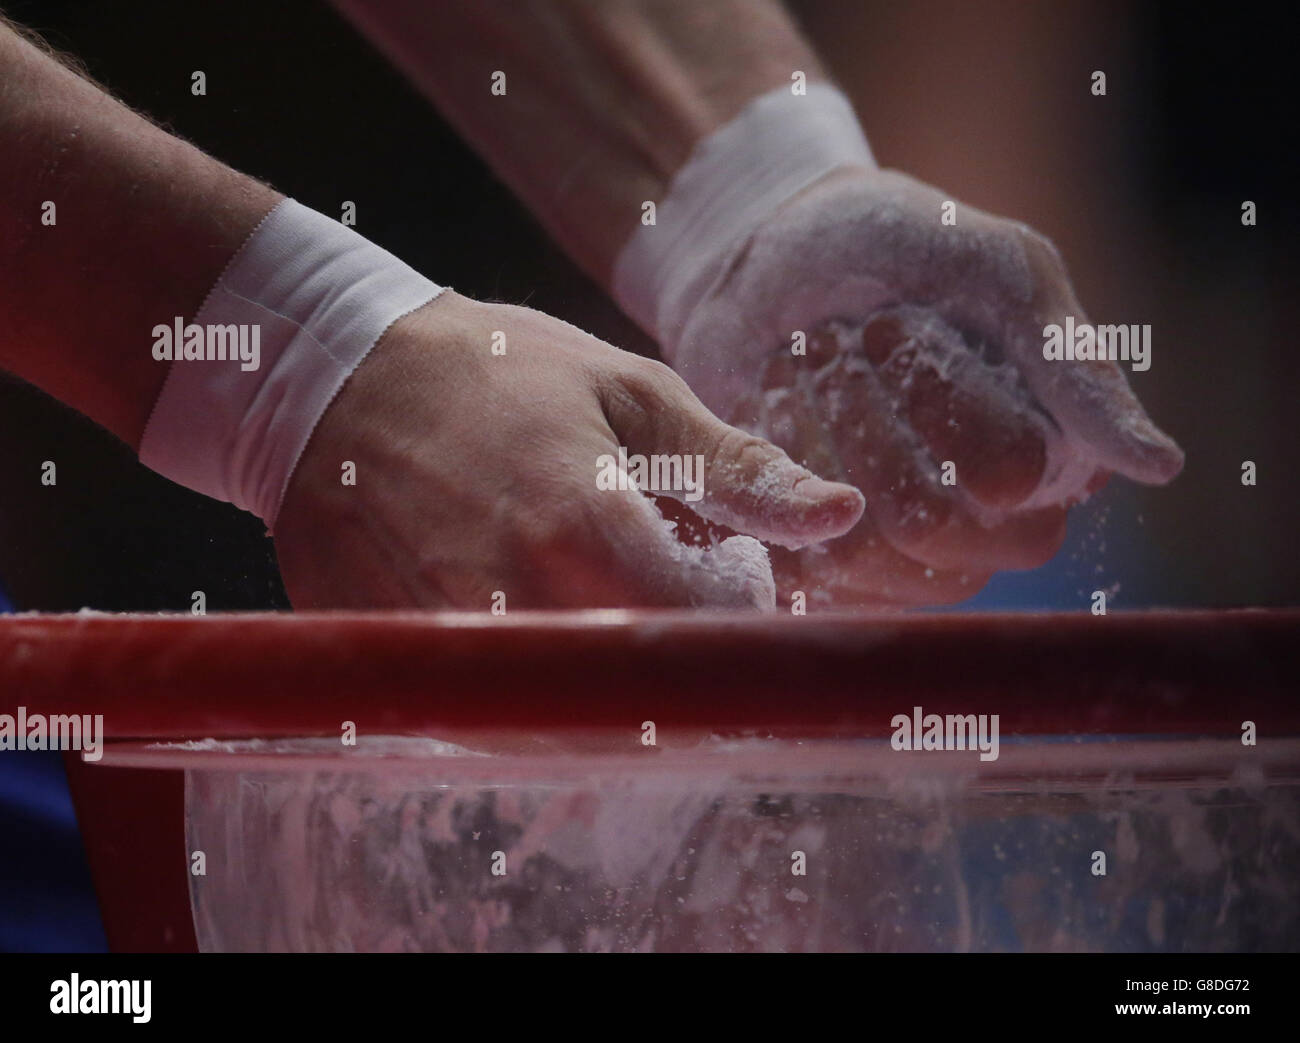 A general view of an athlete putting chalk on their hands during day four of the 2015 World Gymnastic Championships at The SSE Hydro, Glasgow. PRESS ASSOCIATION Photo. Picture date: Monday October 26, 2015. Photo credit should read: Danny Lawson/PA Wire. RESTRICTIONS: Strictly no commercial use or association without prior permission from gymnast or their agent. No image sequences in excess of 5 images per second. Call +44 (0)1158 447447 for further info. Stock Photo